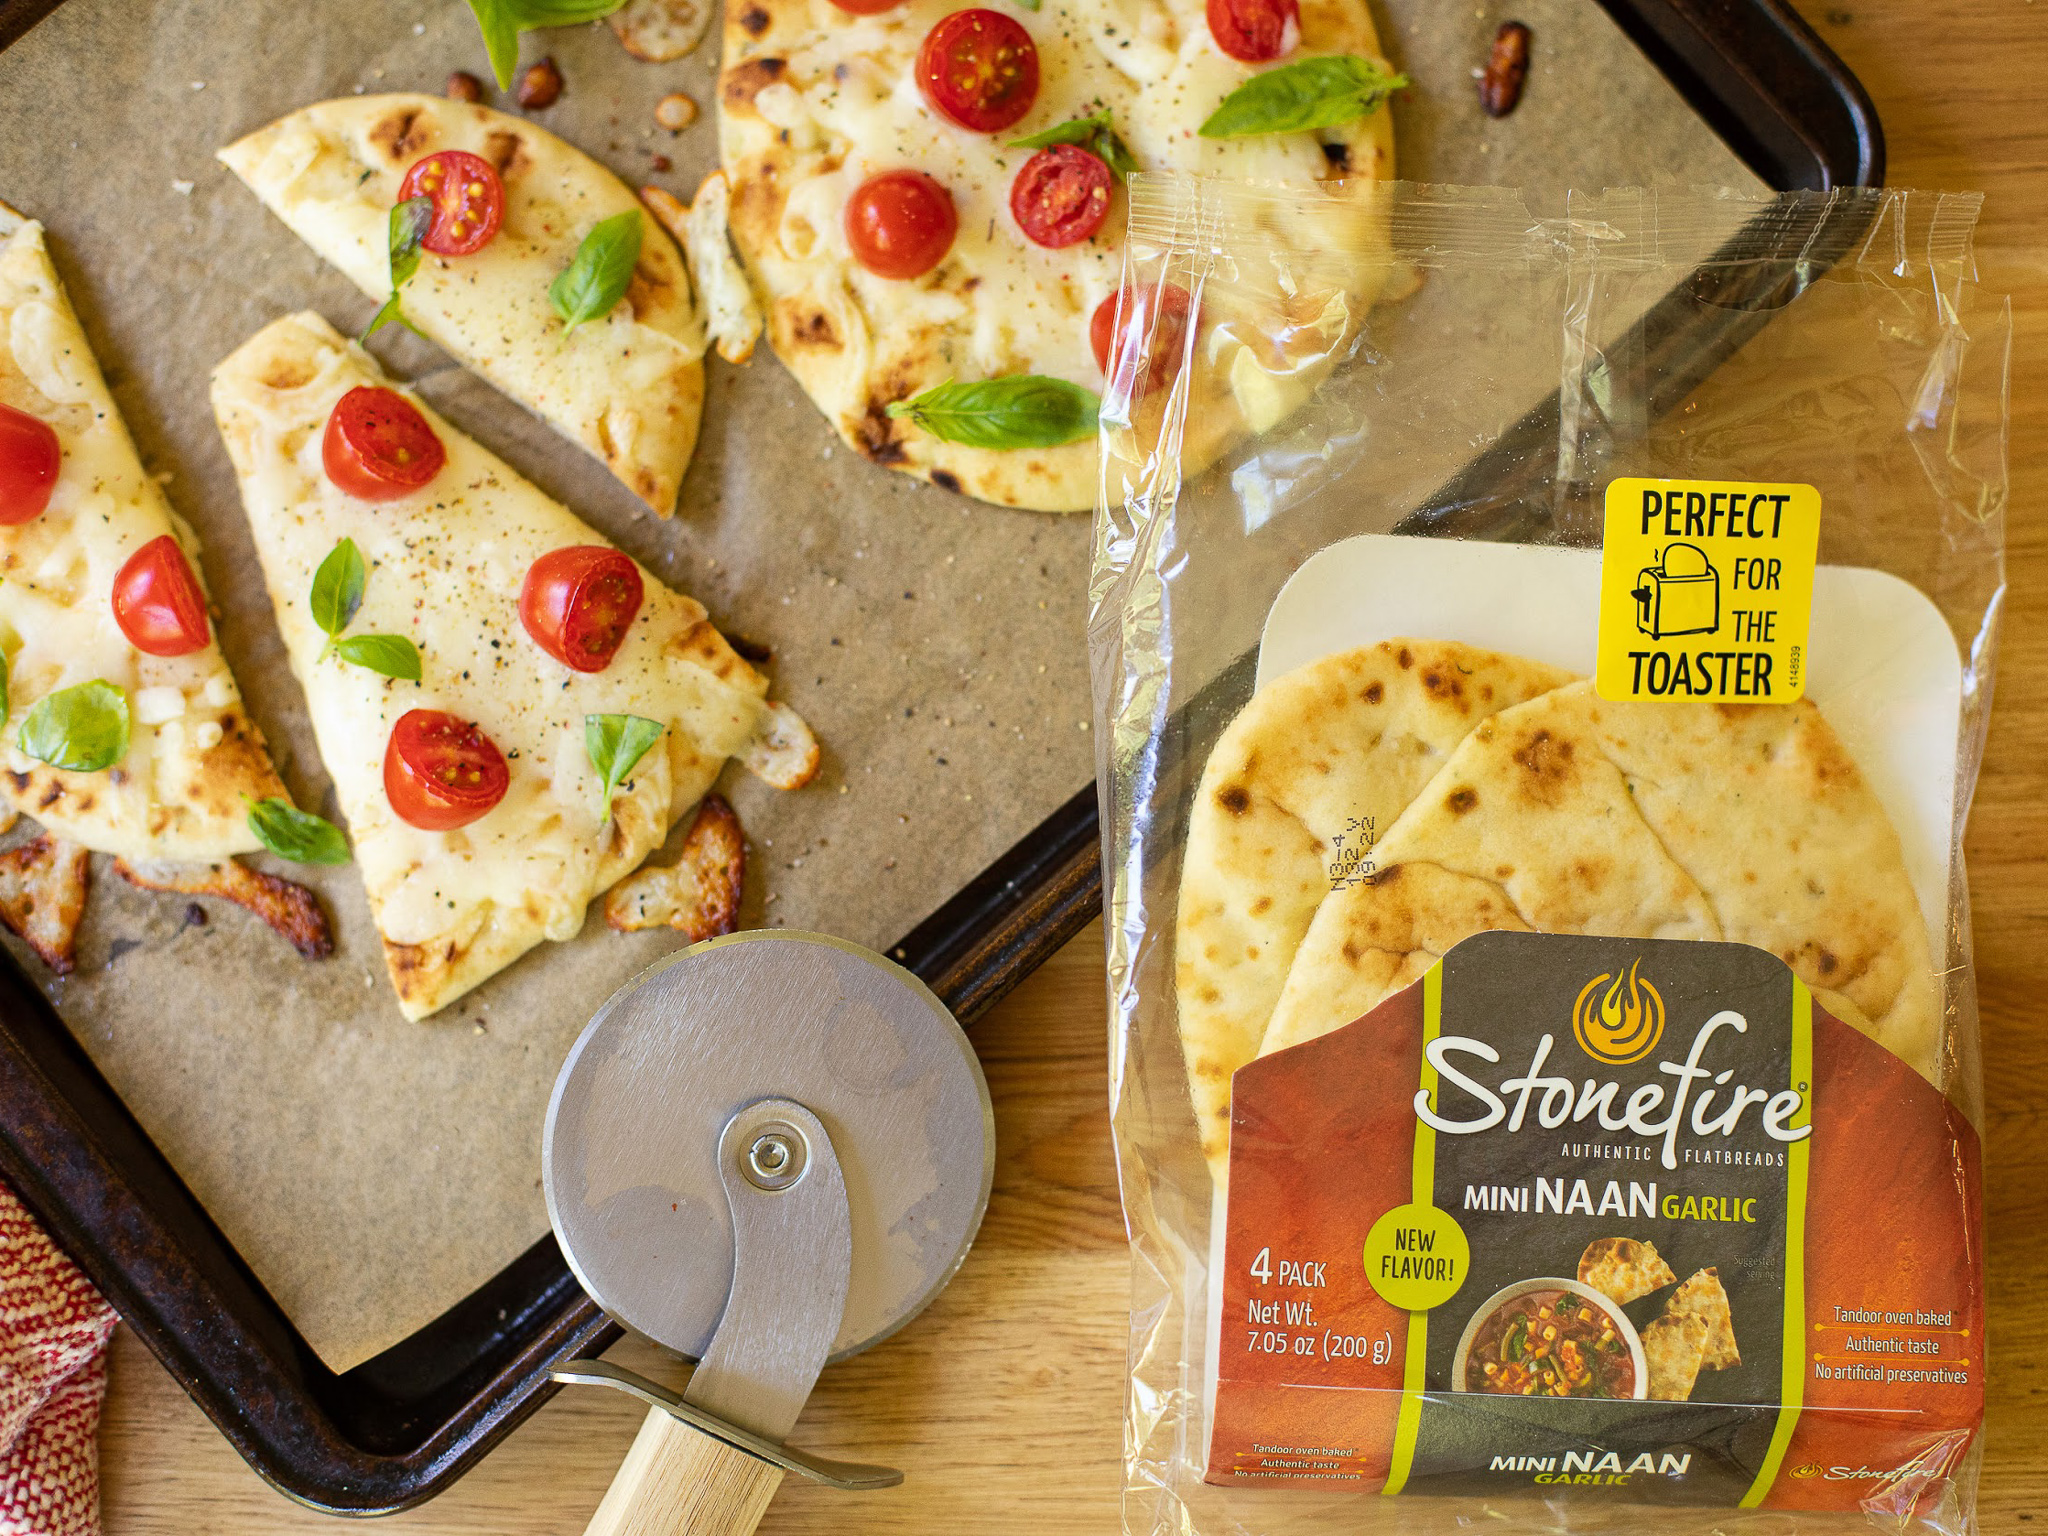 Stonefire Naan Deals At Publix – Get Products As Low As 90¢ At Publix